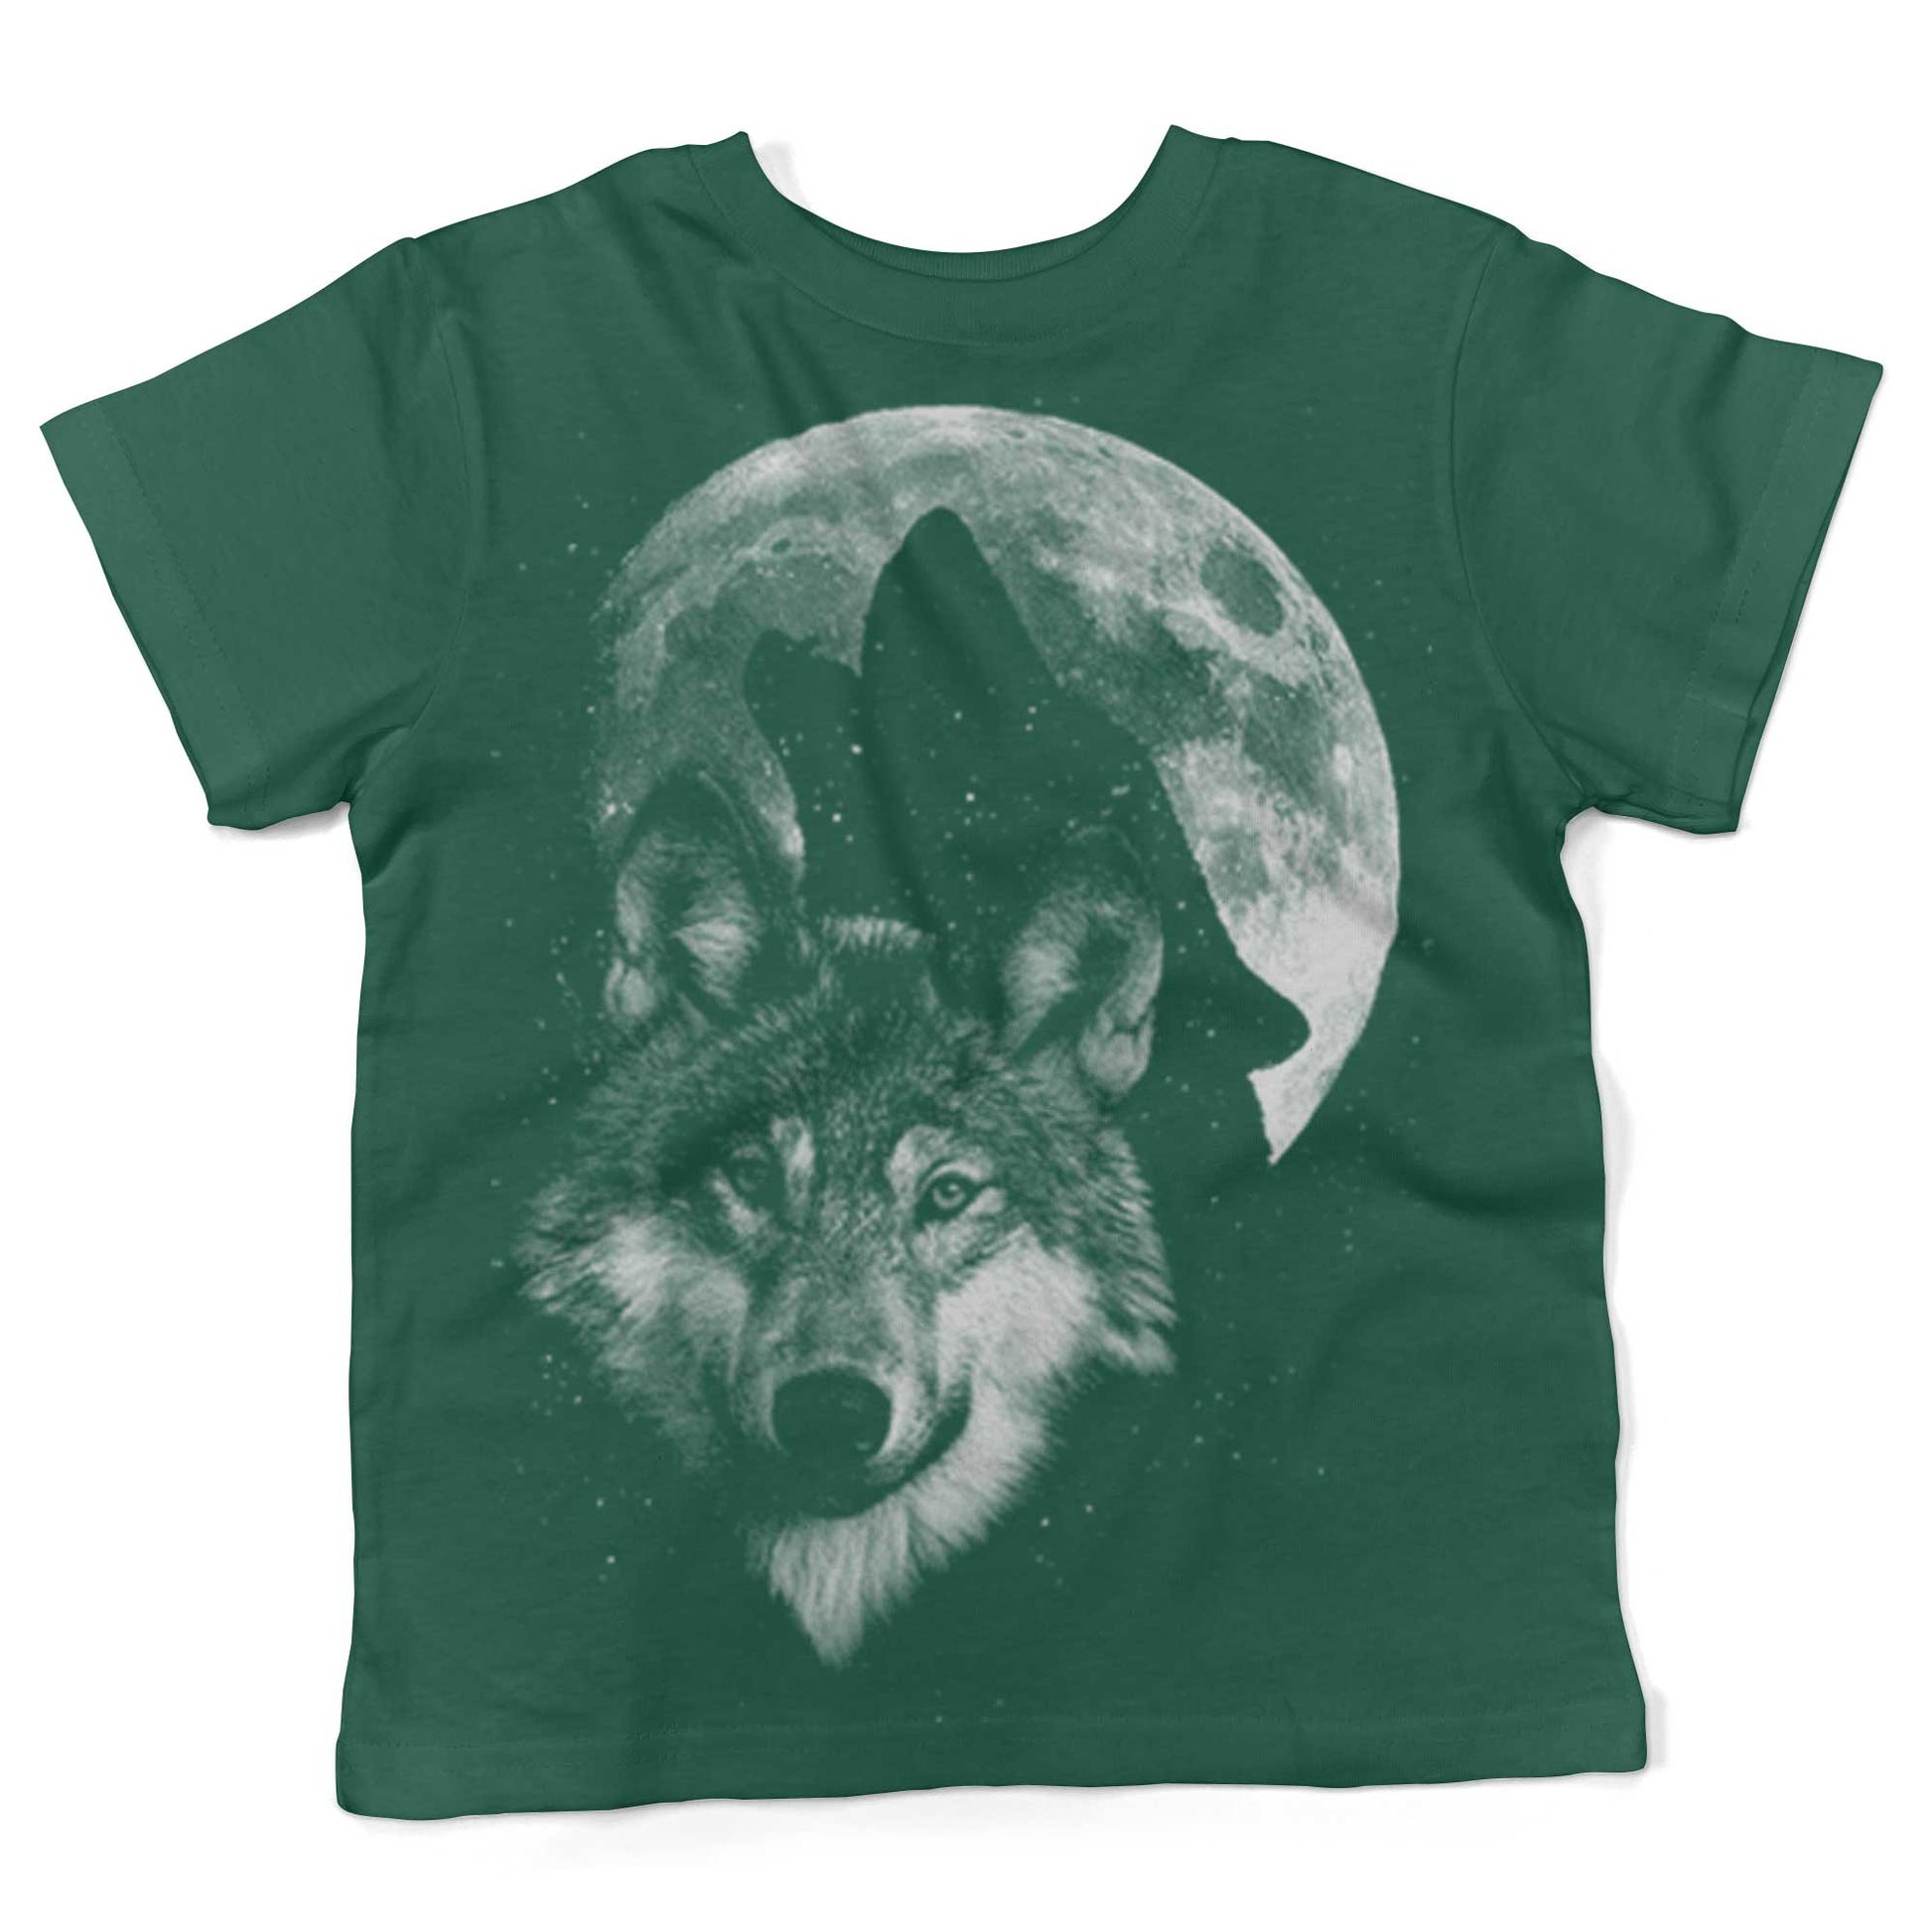 Glow In The Dark Howling Wolf, Full Moon Toddler Shirt-Kelly Green-2T